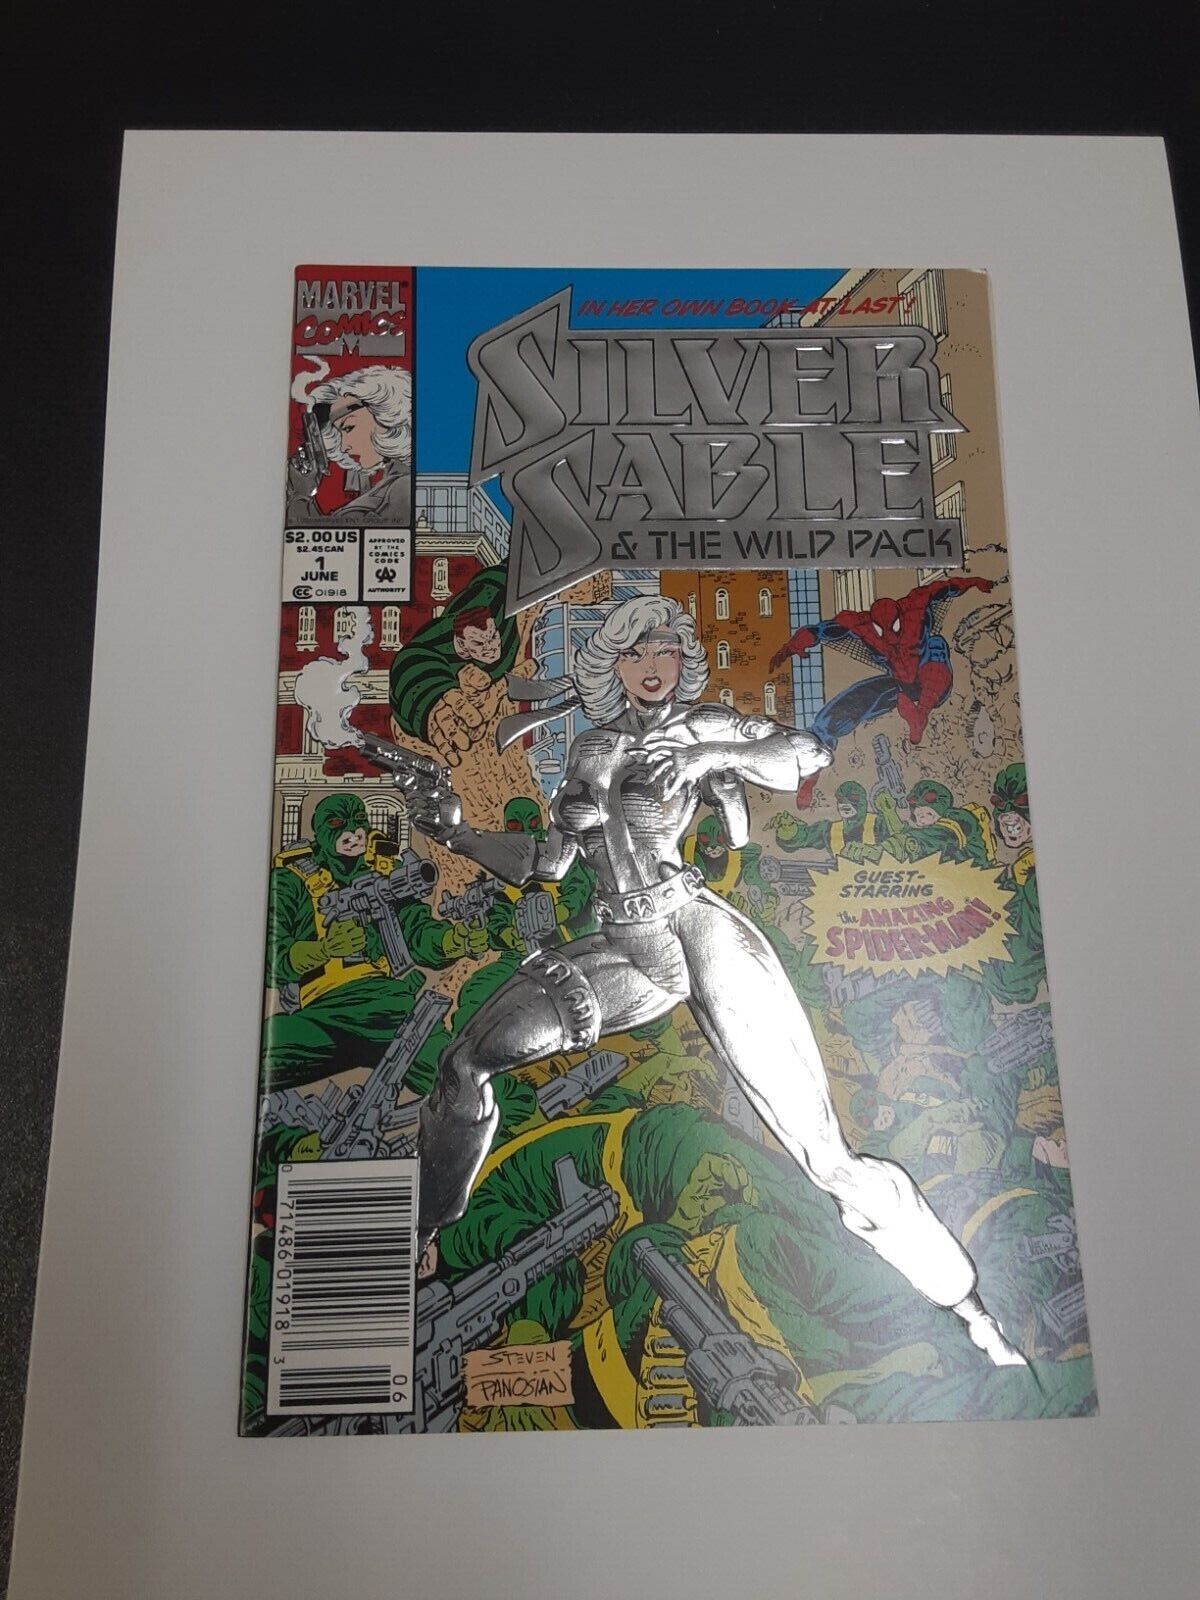 SILVER SABLE #1 NEWSSTAND Cardstock Embossed Cover  Written by Gregory Wright